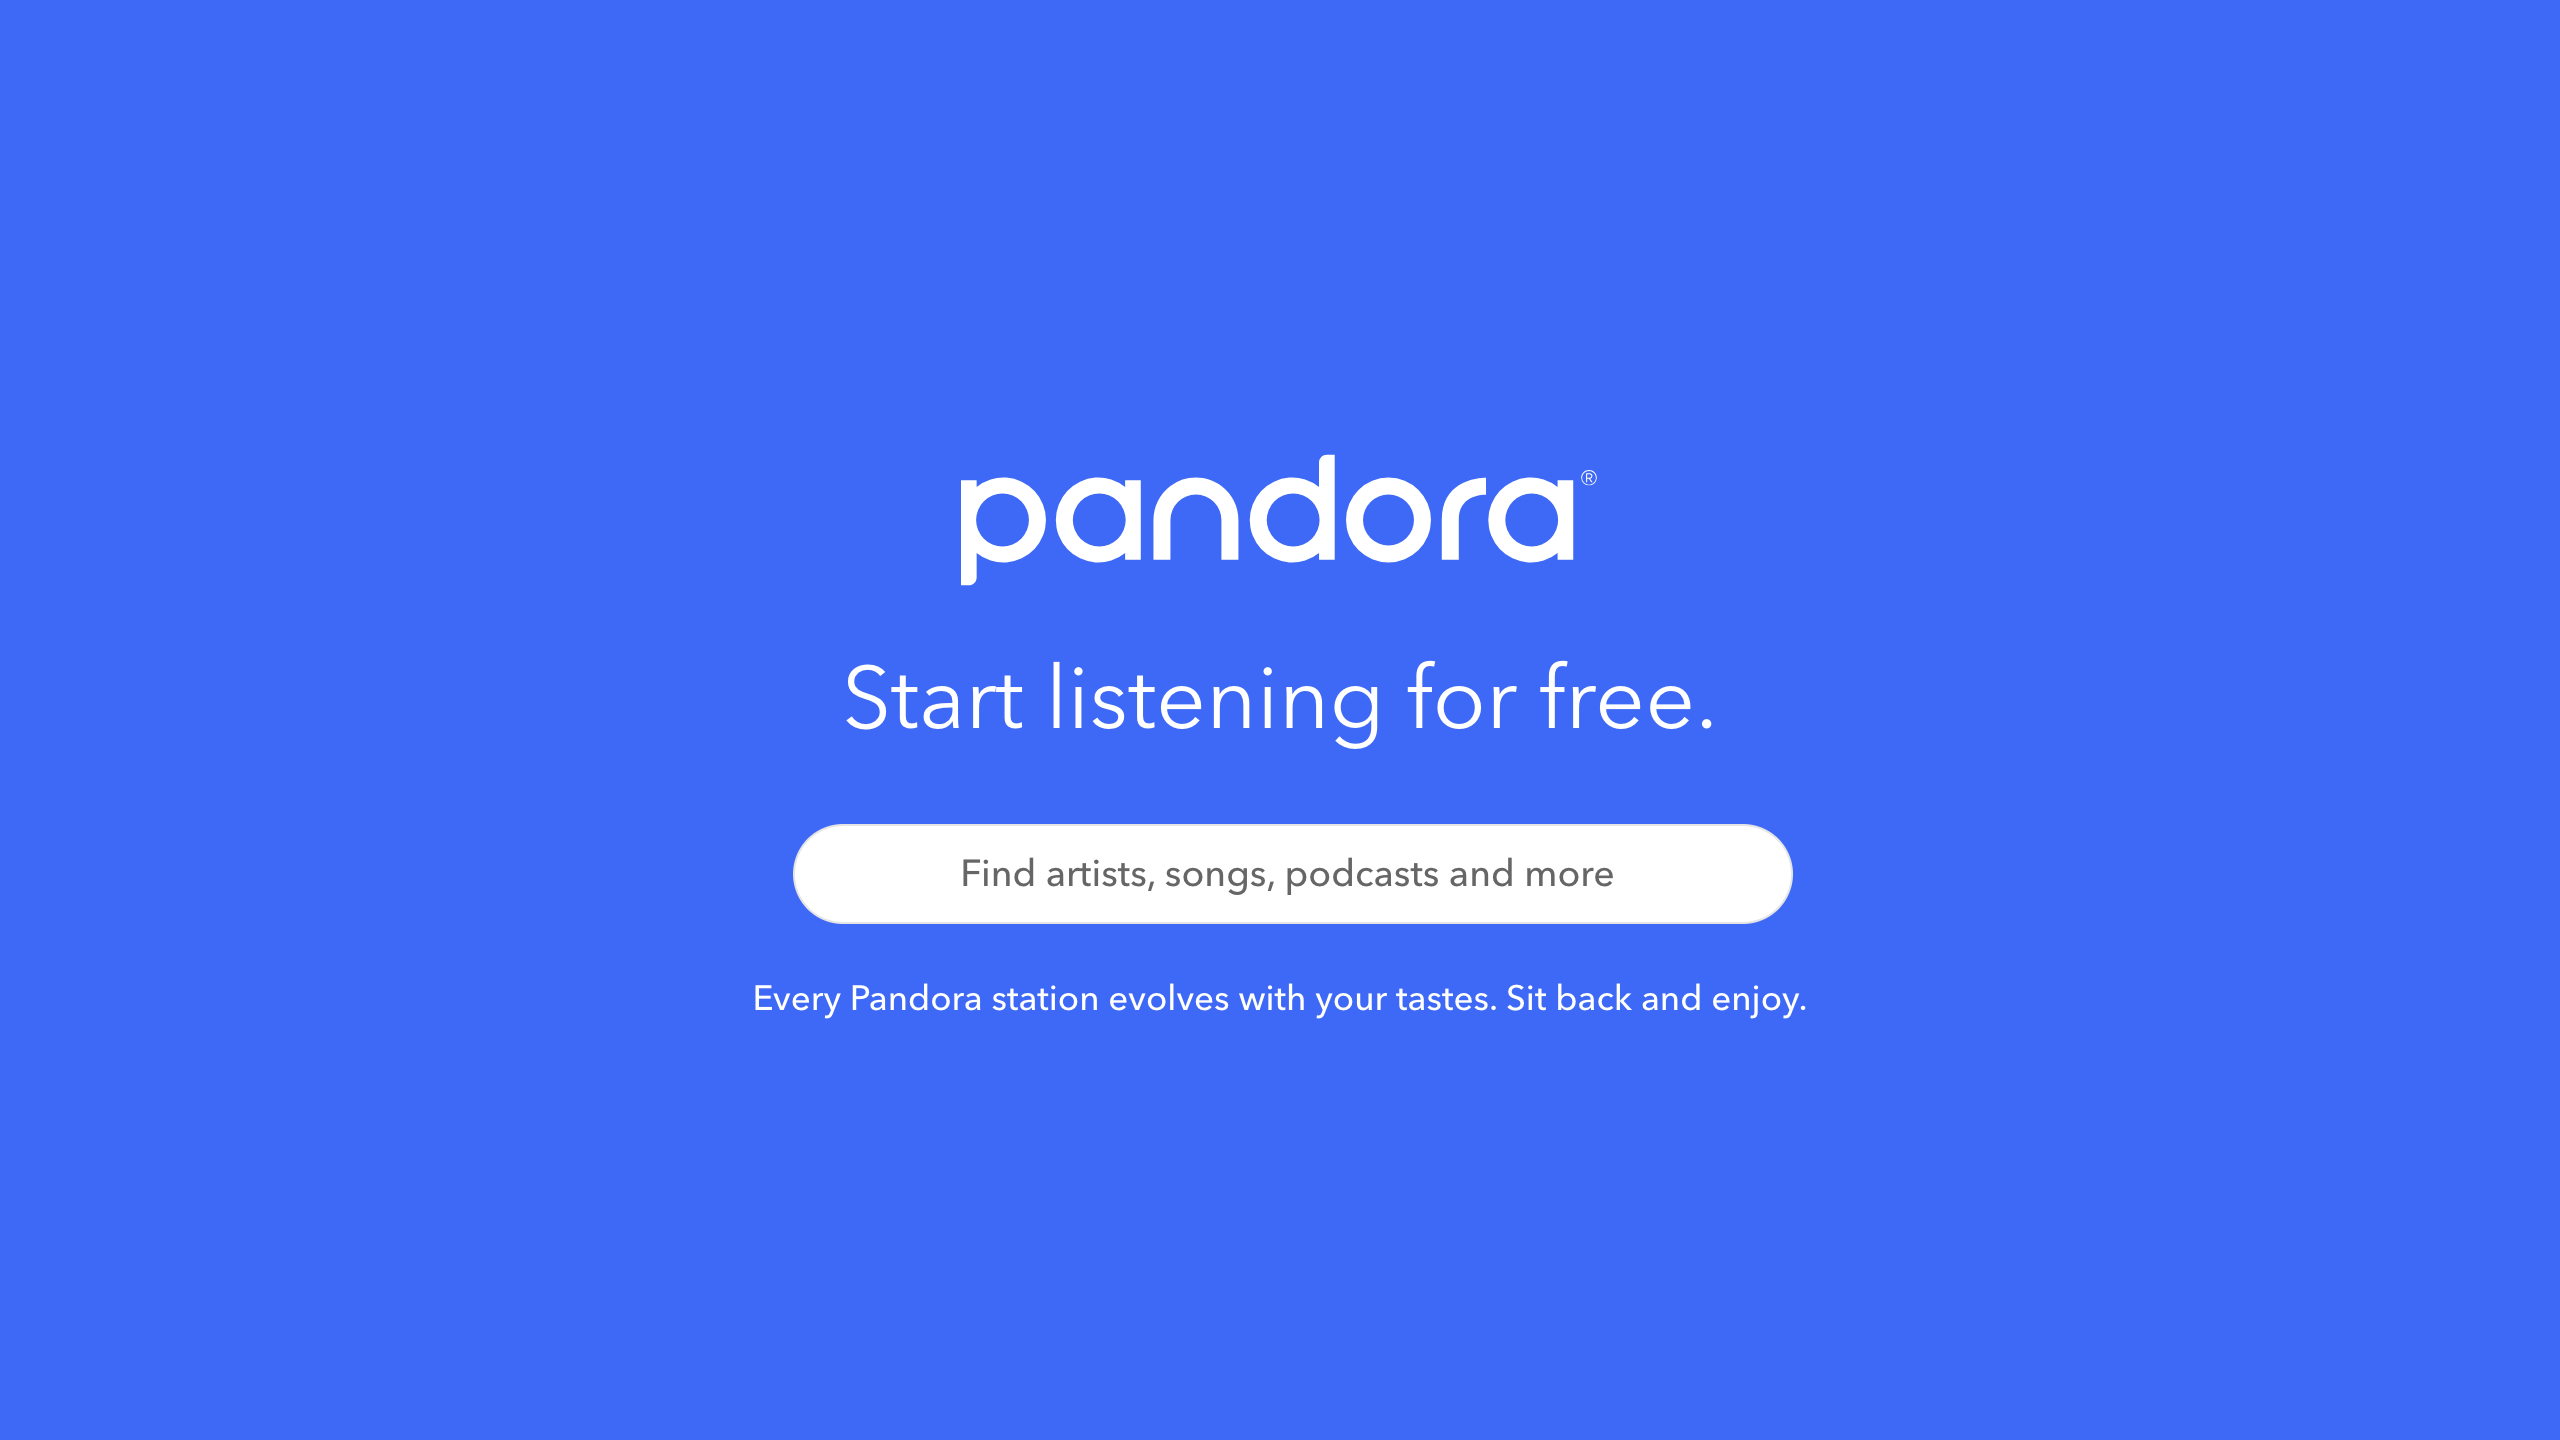 Pandora’s users continue to drop as SiriusXM publish their Q1 2021 earnings